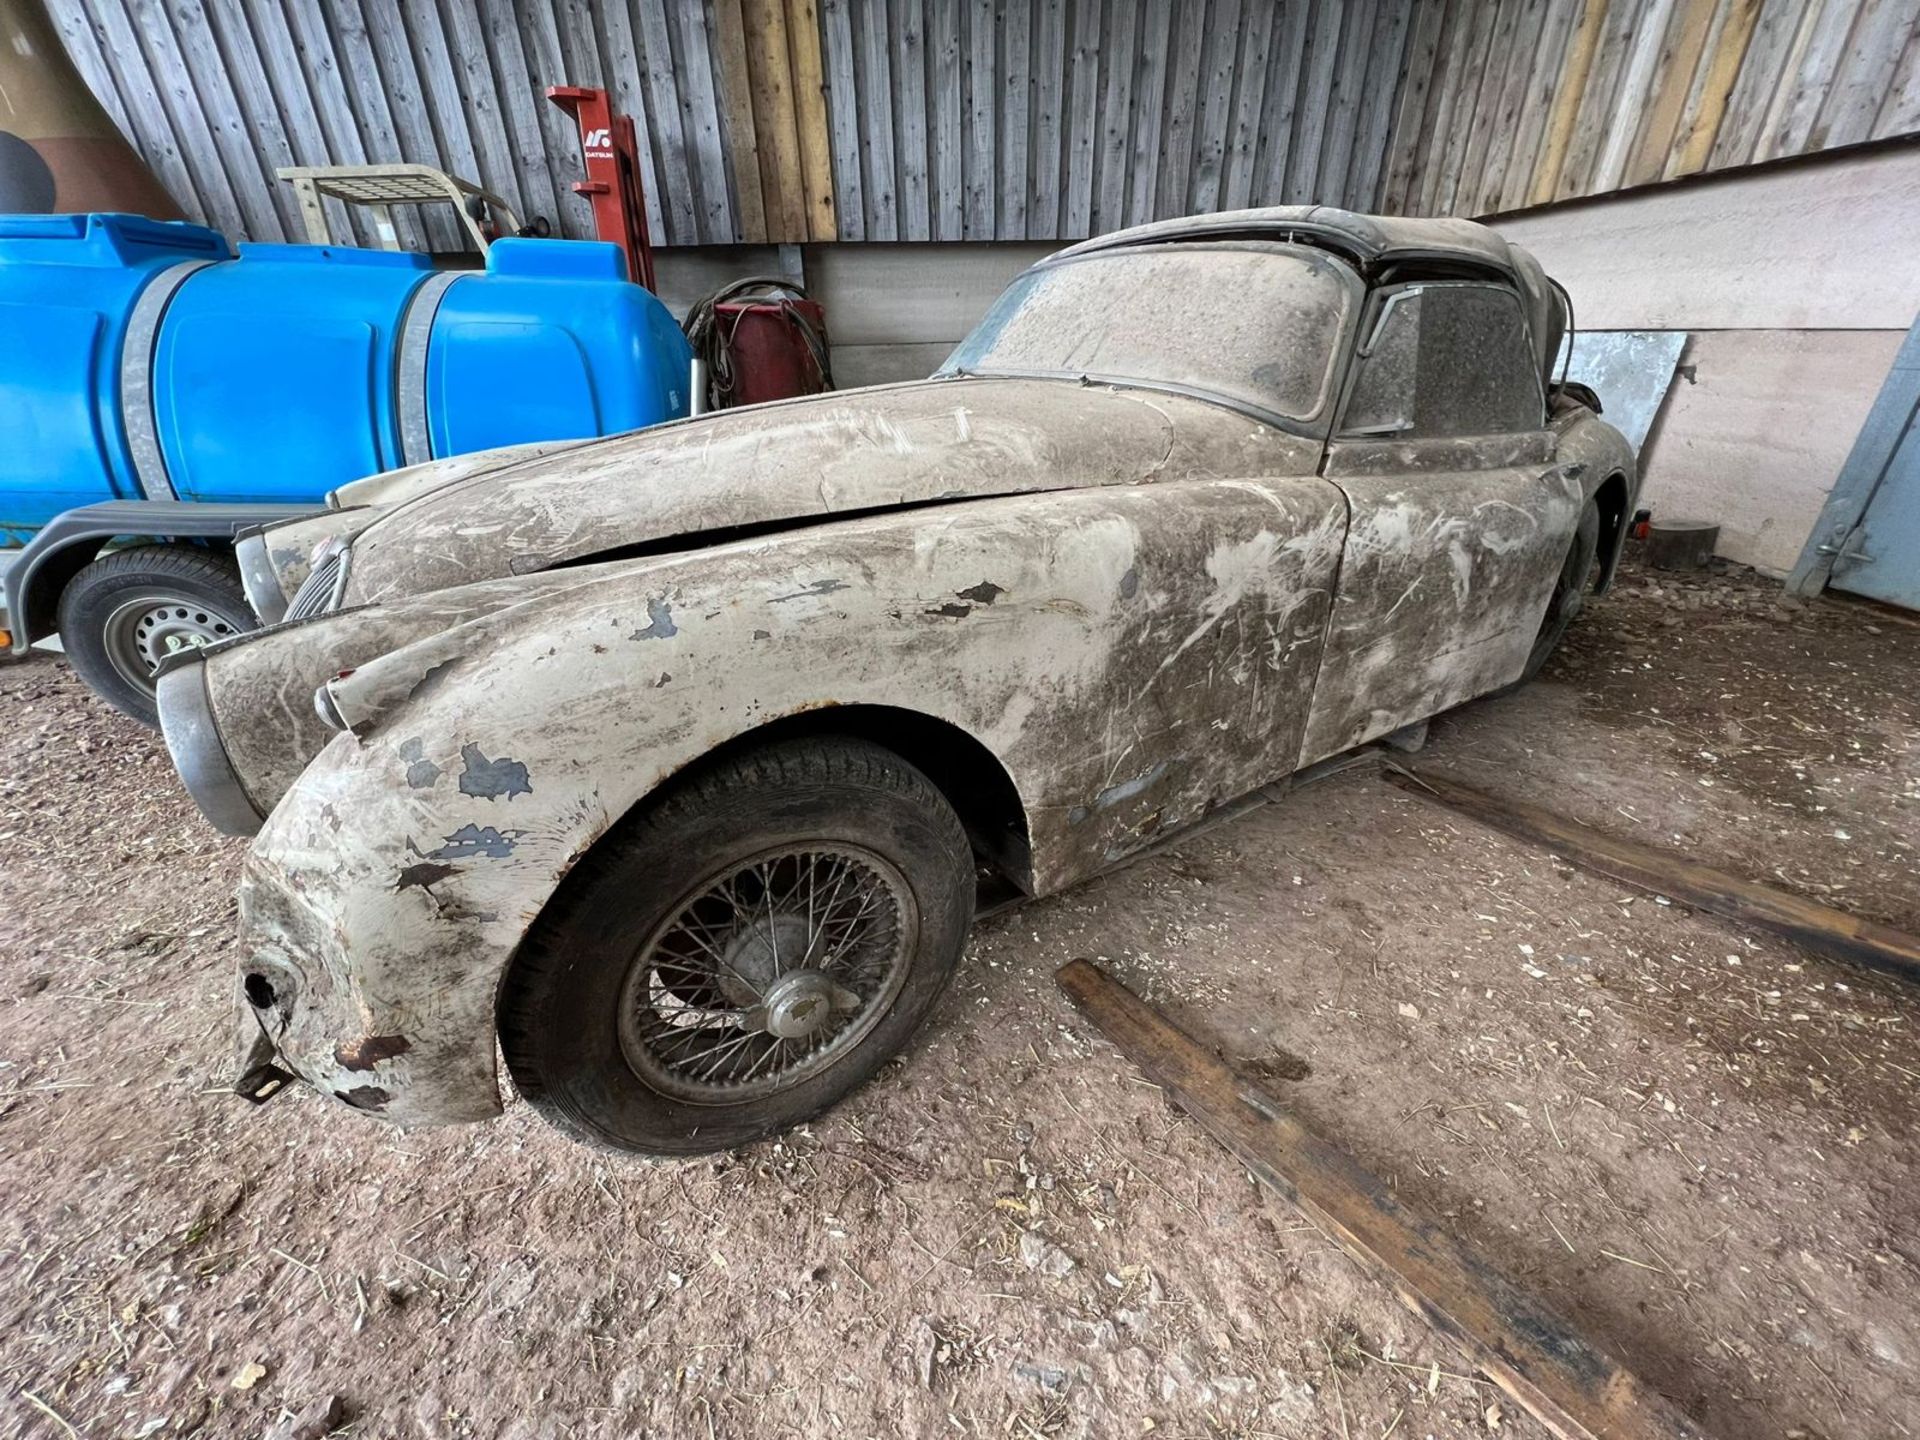 Jaguar XK150 3.4 Drop Head Coupe 1958 Barn Find. Matching numbers. - Image 2 of 30